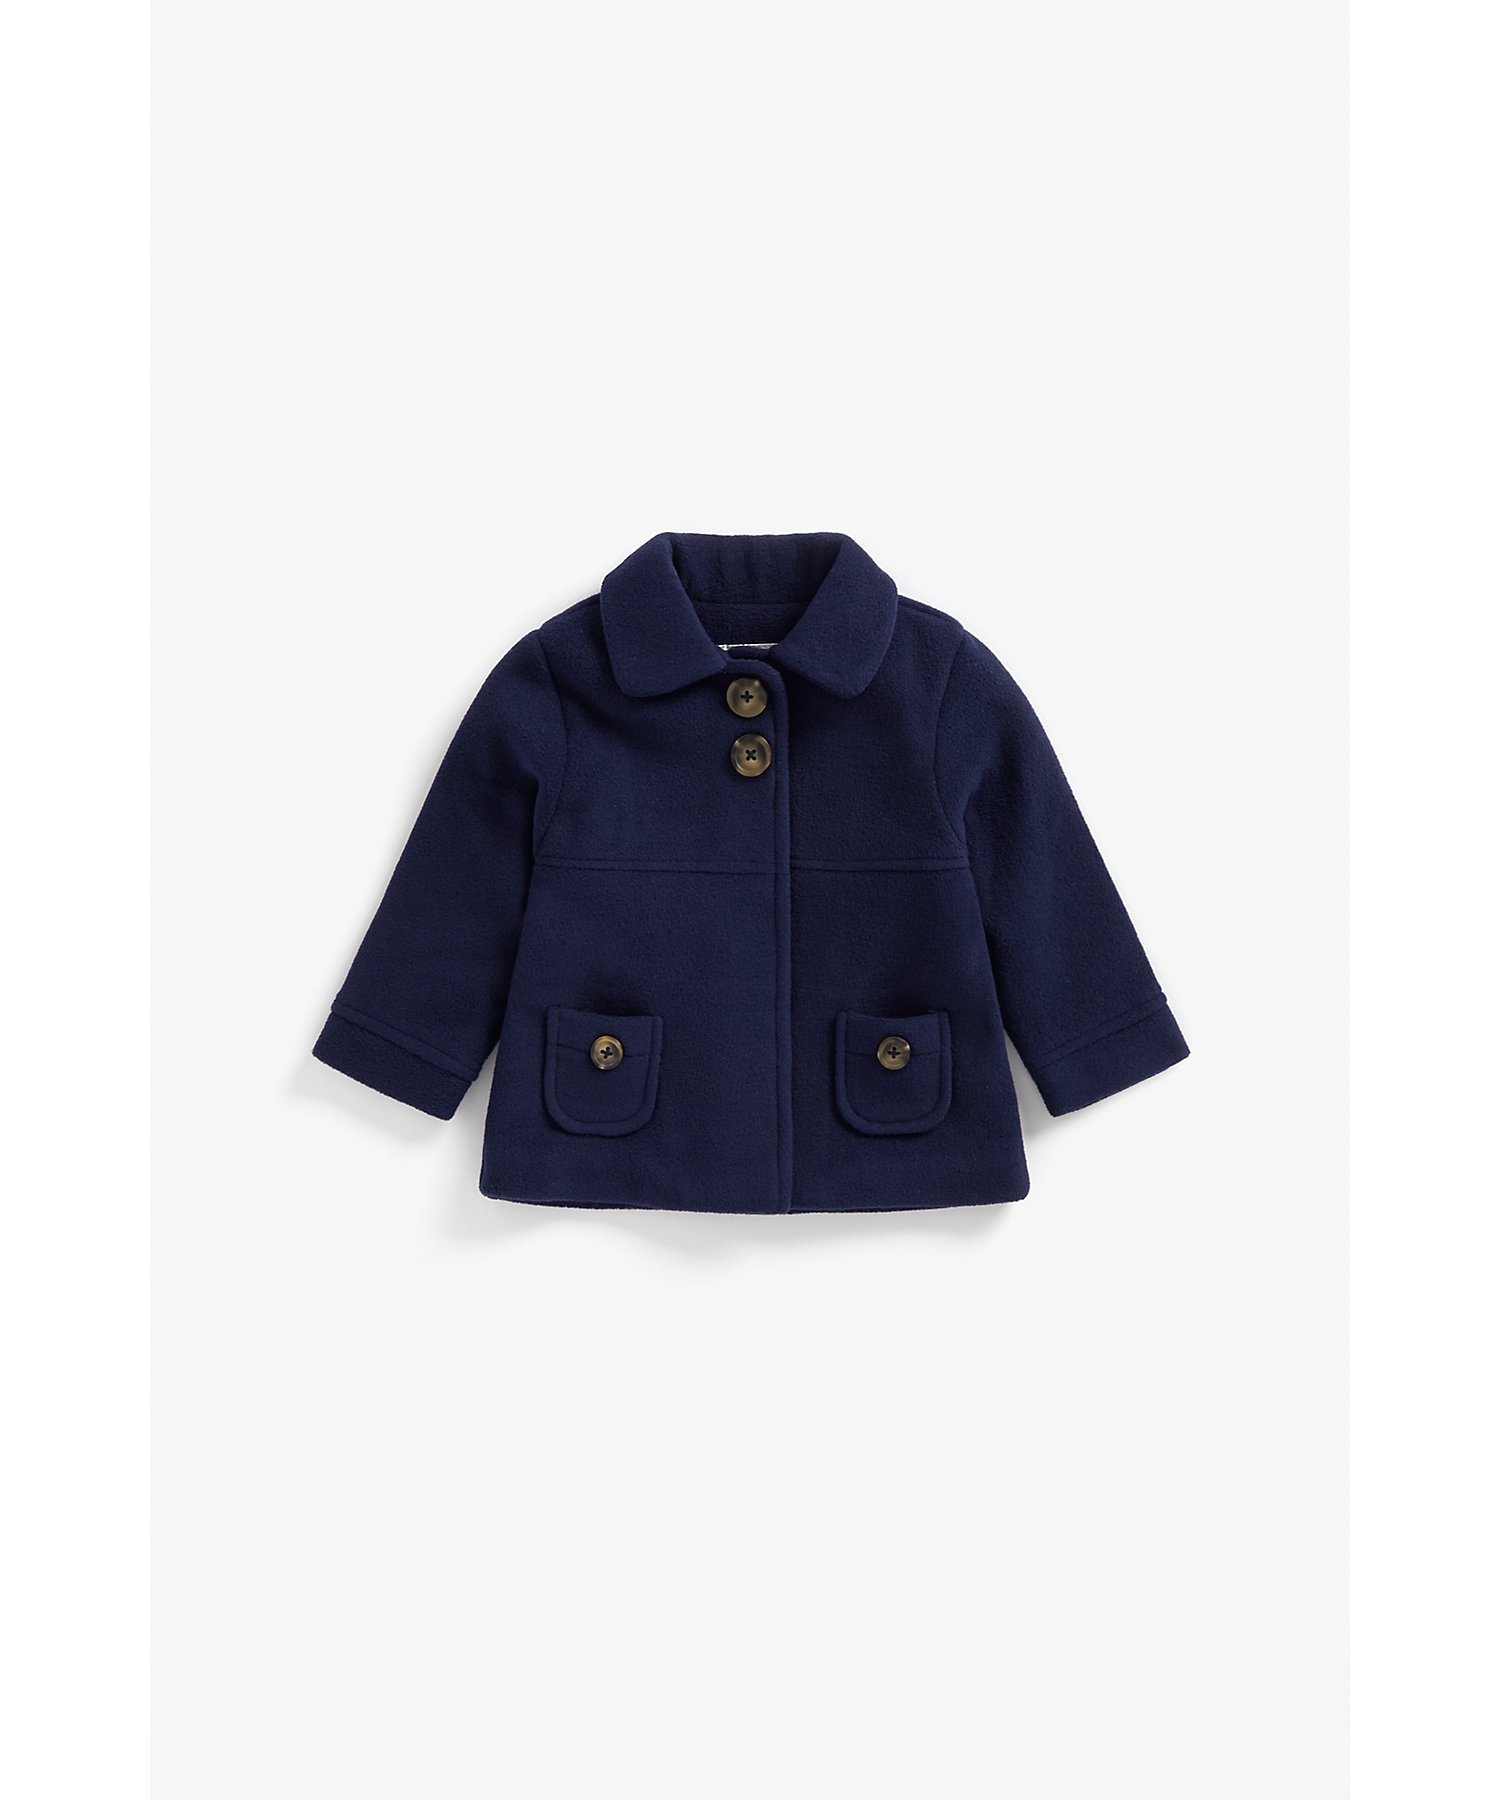 Mothercare | Girls Full Sleeves Coat With Pocket Detail - Navy